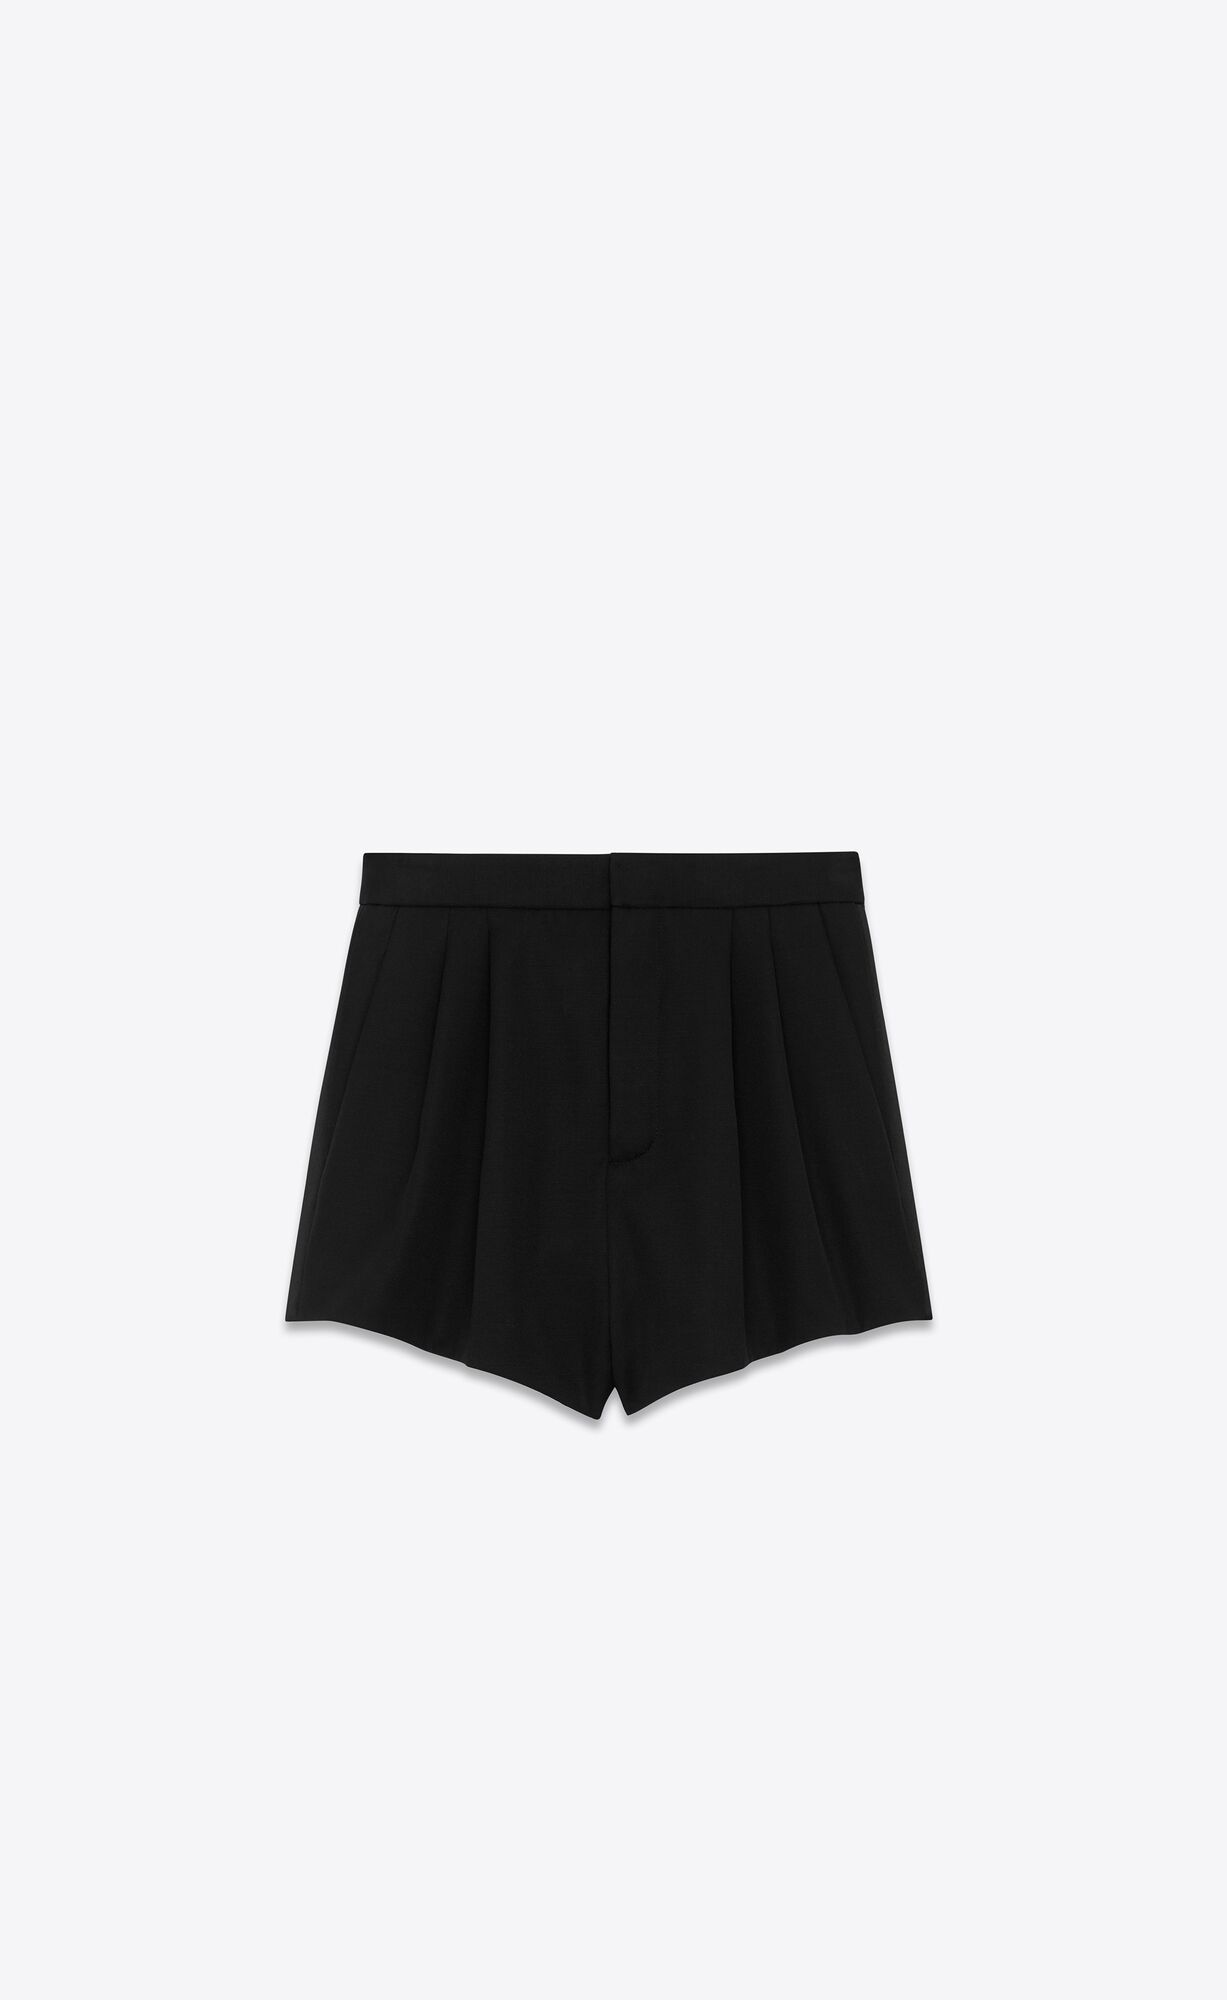 Tuxedo shorts with double pleat and satin bands at the side. | Saint Laurent Inc. (Global)